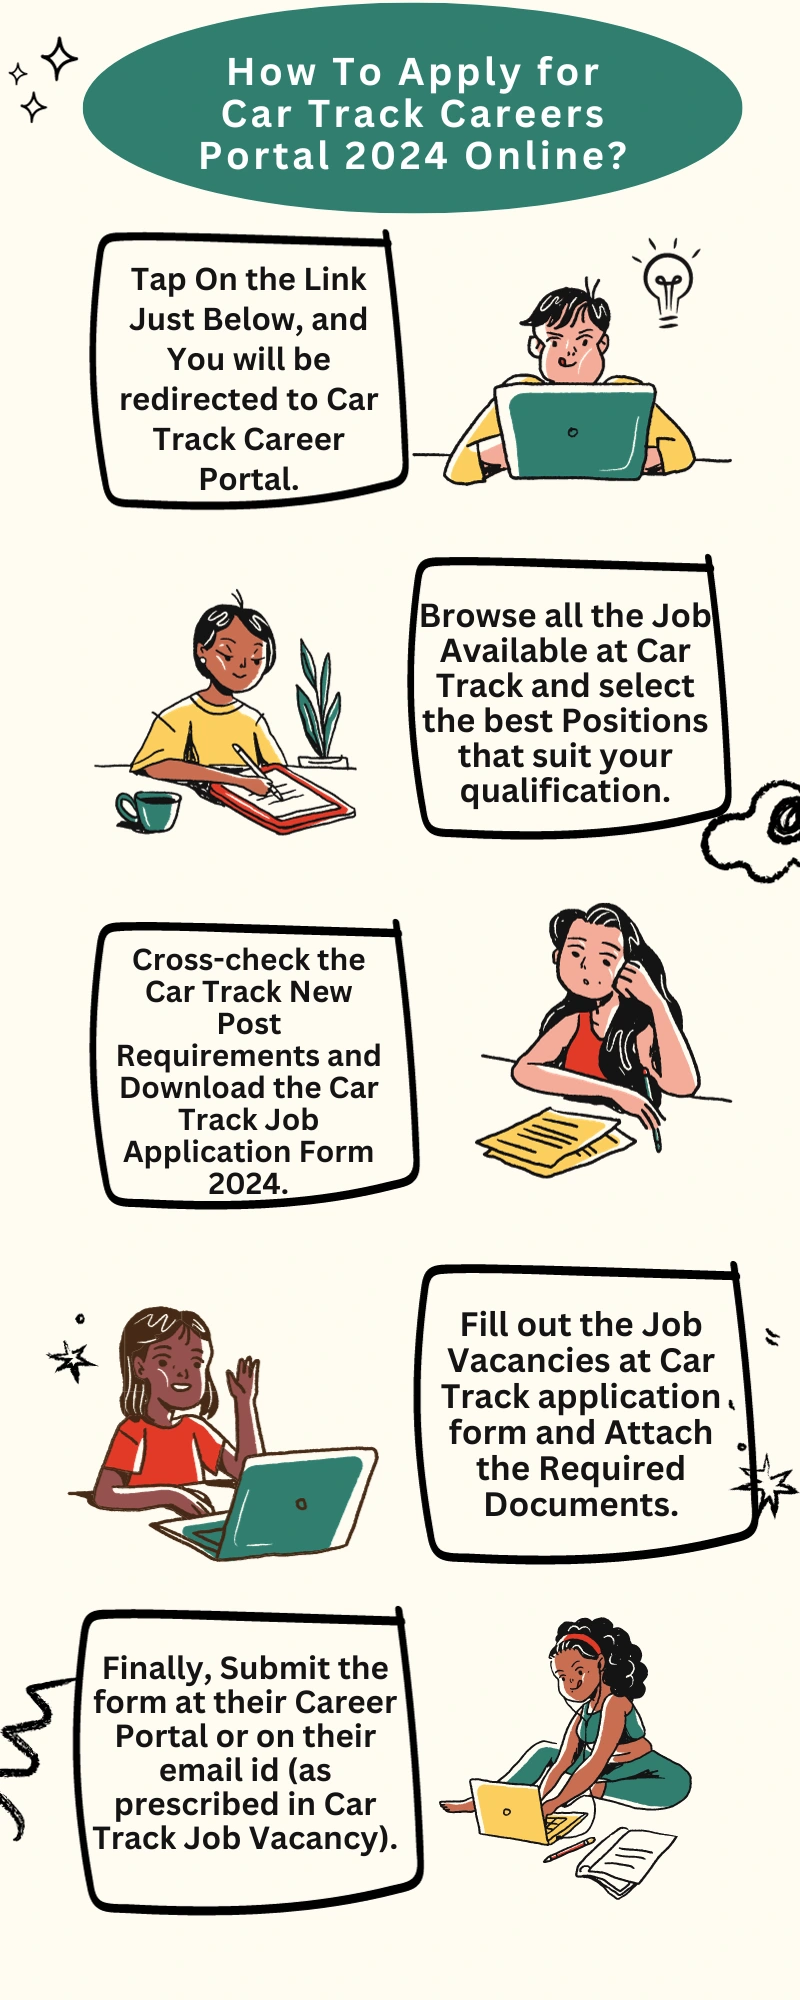 How To Apply for Car Track Careers Portal 2024 Online?